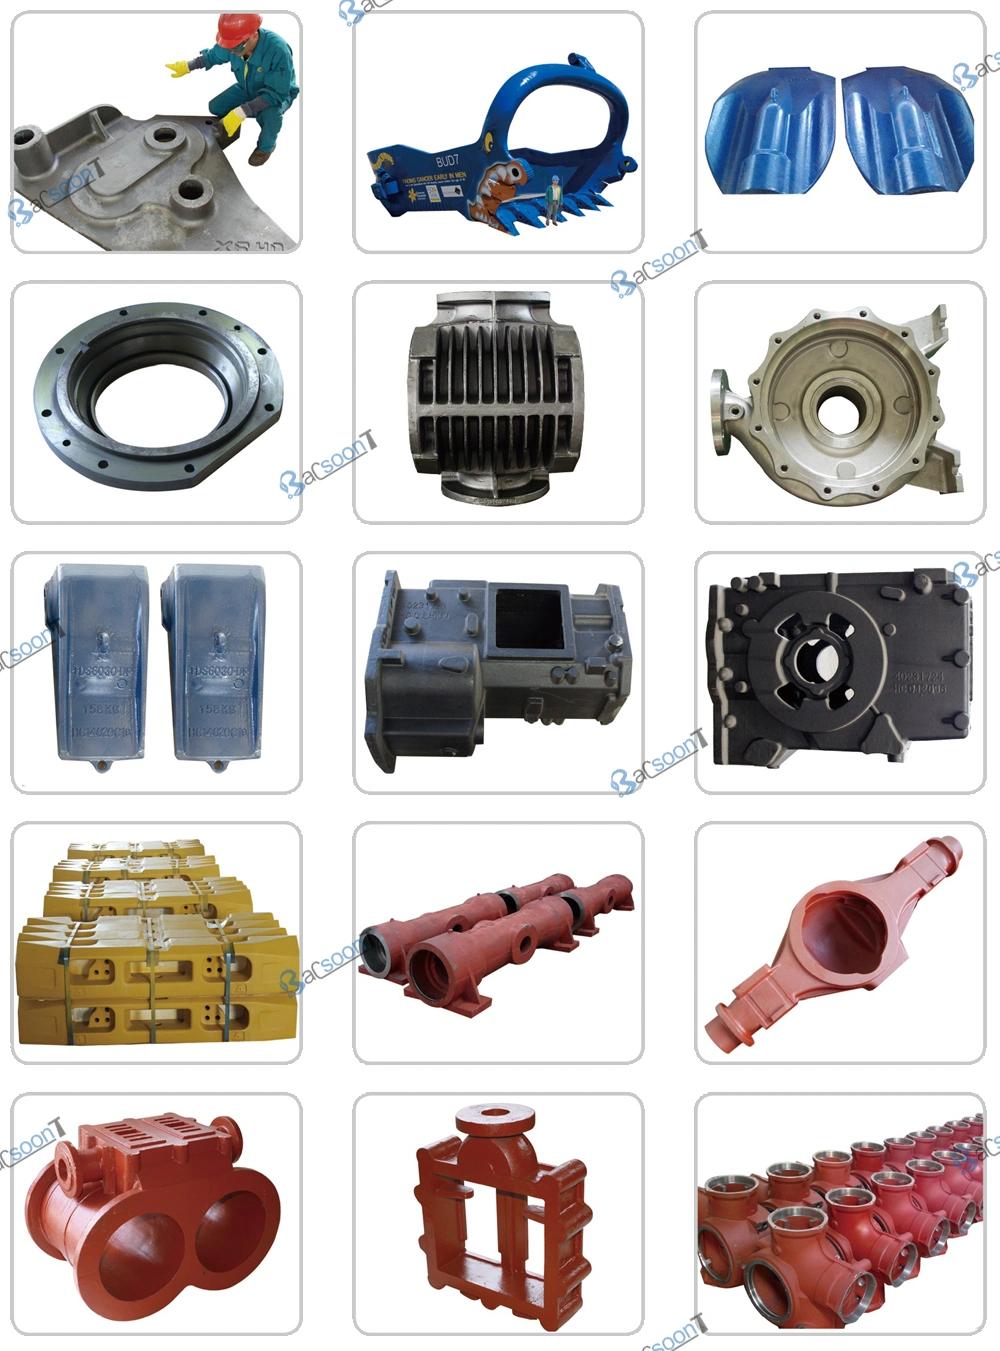 Sand Casting Steel Alloy Track Link for Engineering Machinery